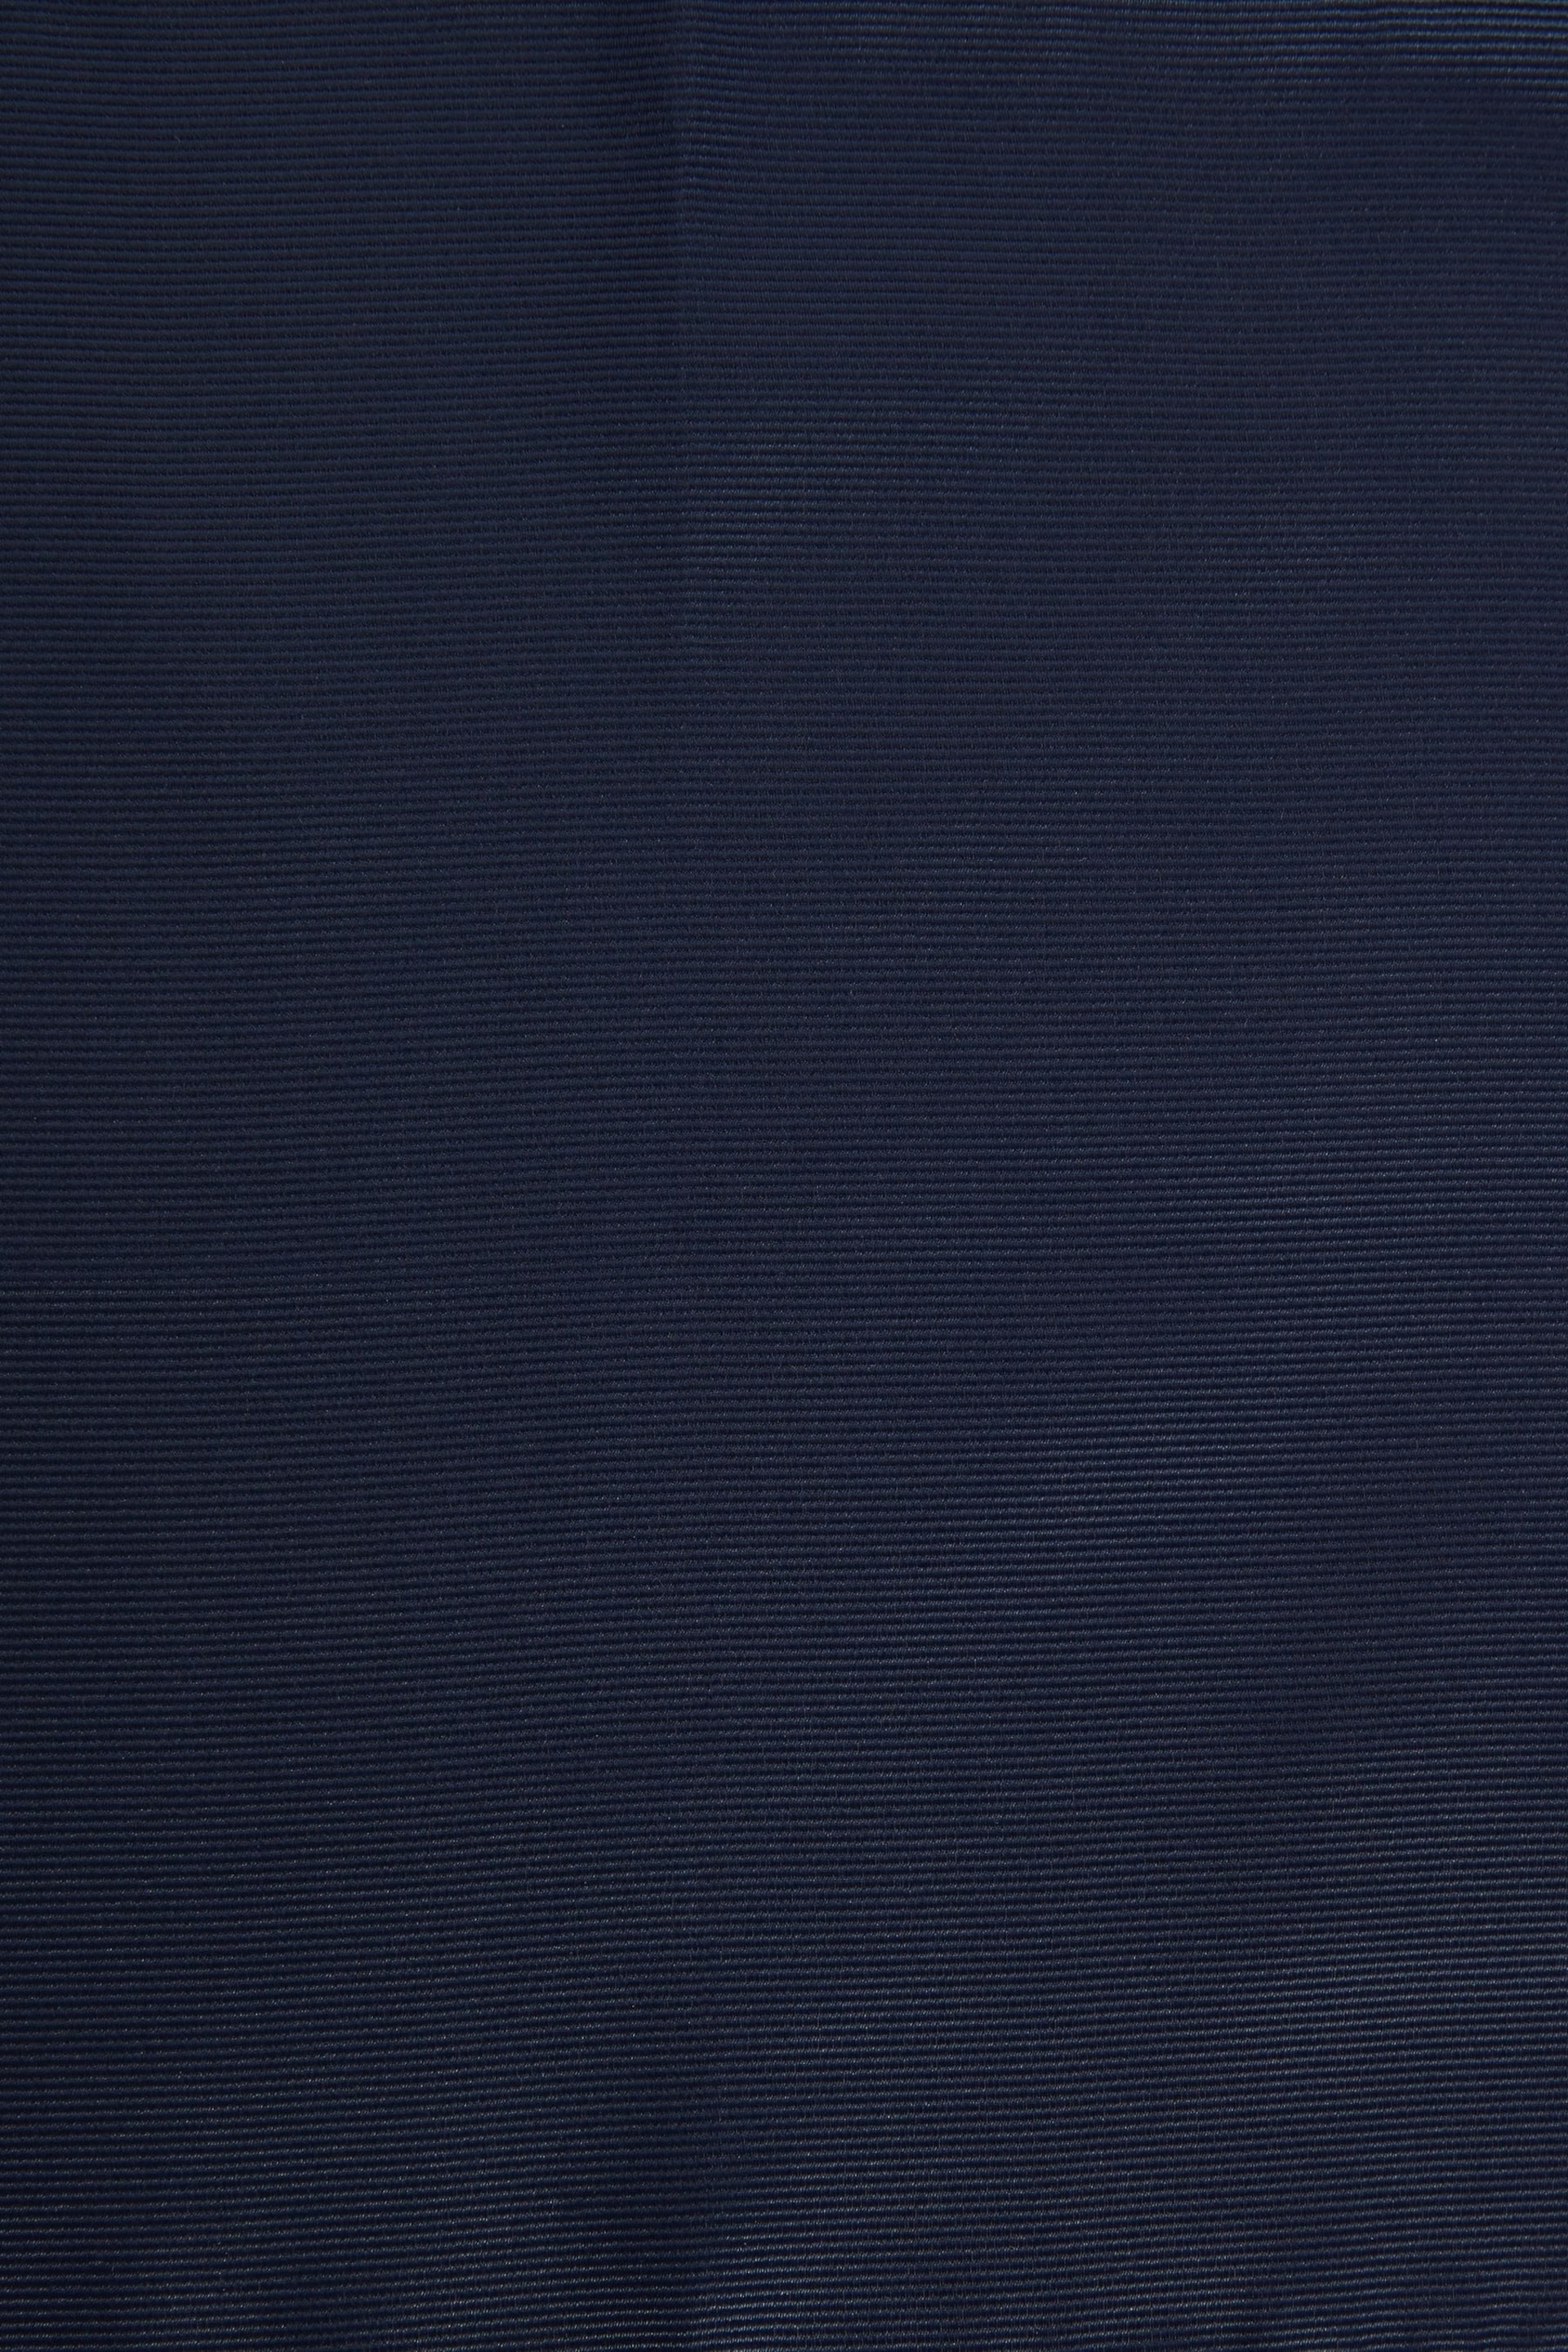 Navy Blue Recycled Polyester Twill Pocket Square - Image 3 of 3